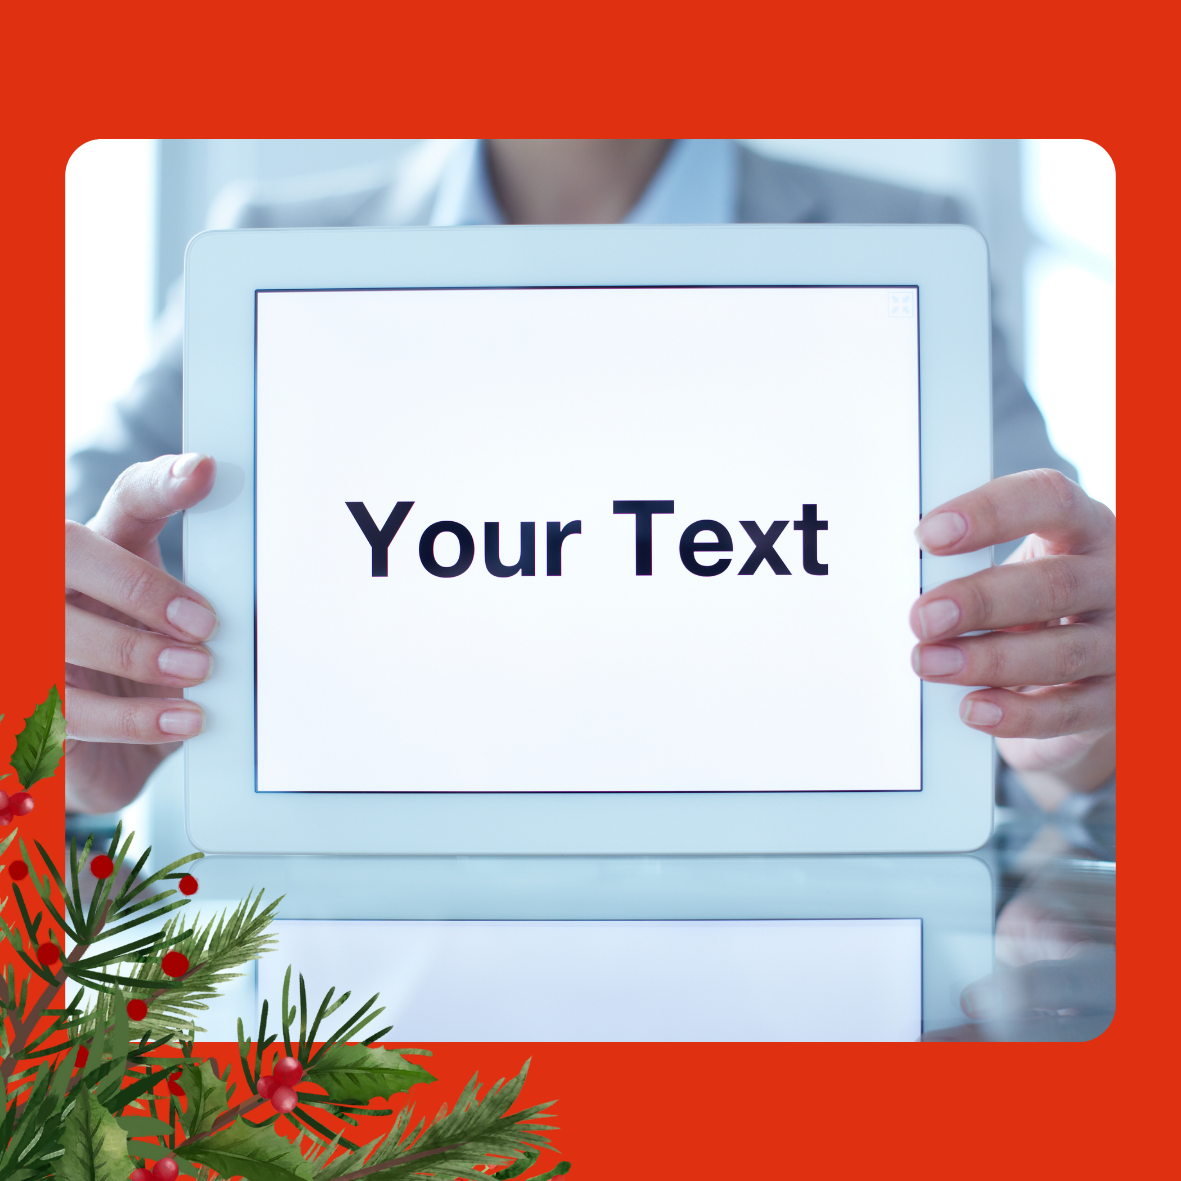 An image of a tablet being held up to the camera, with the words Your Text. The image is on a red background and there is holly and berries in the left bottom corner. 